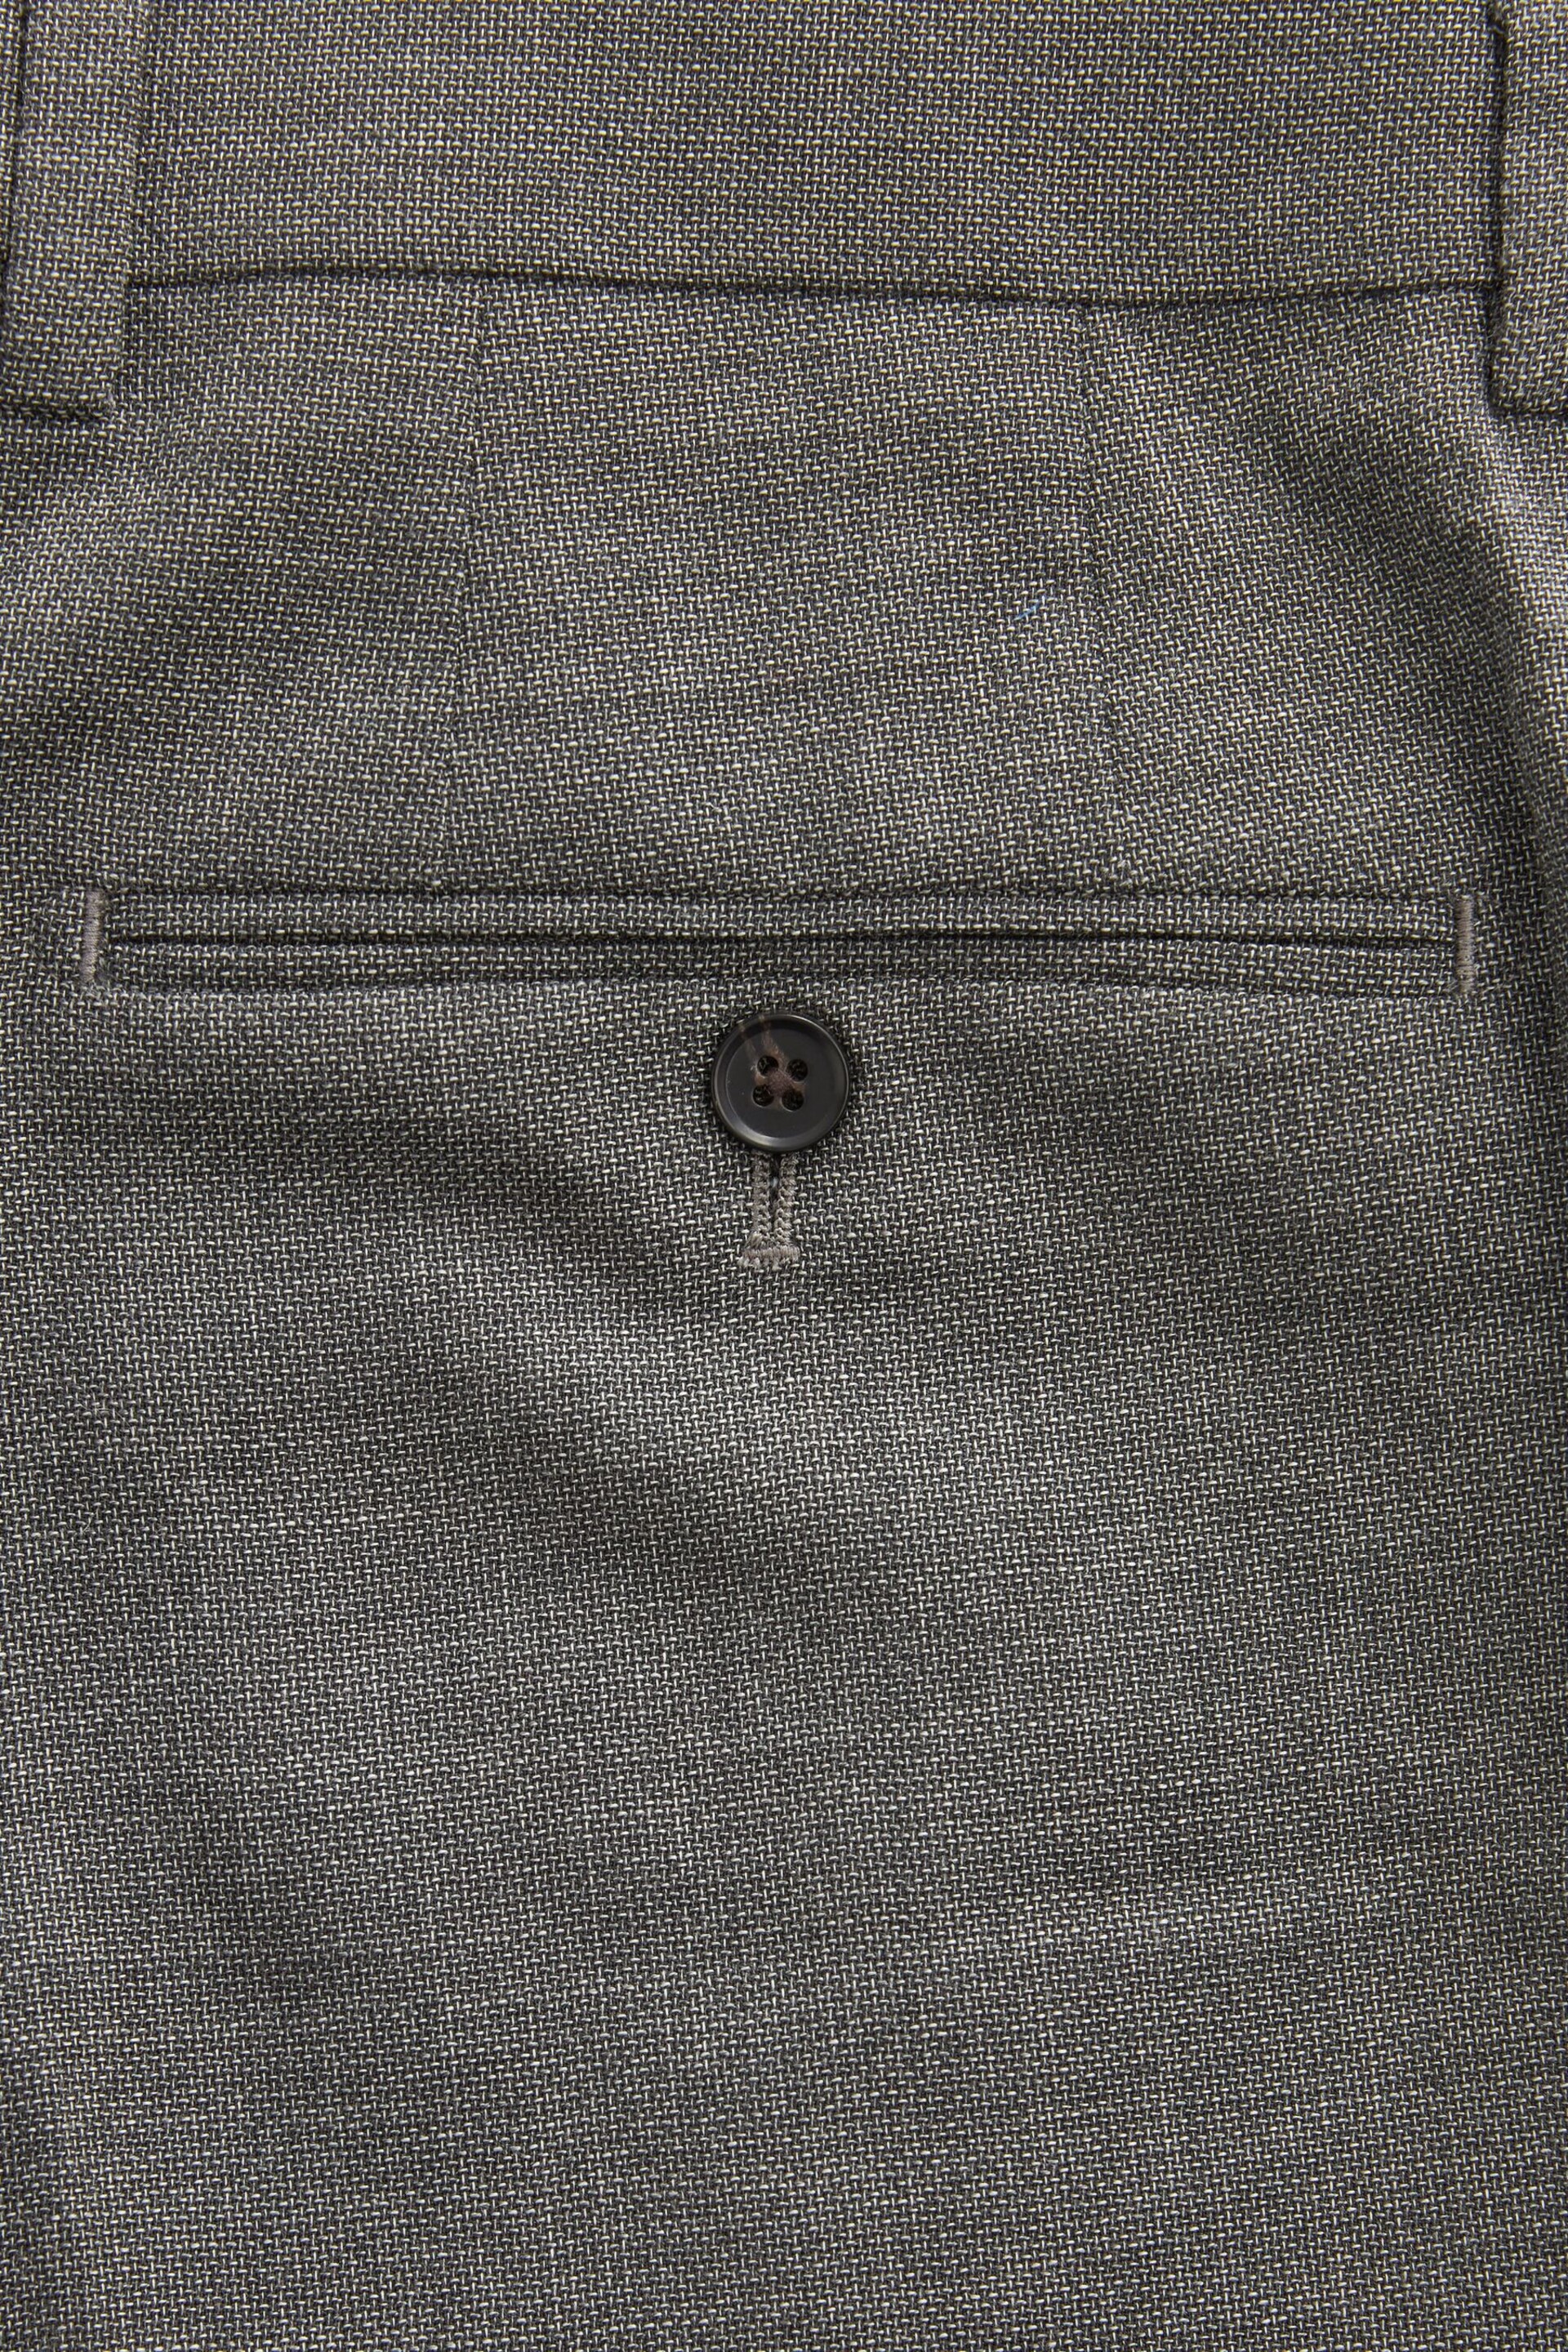 Grey Slim Fit Signature Marzotto Italian Fabric Textured Suit: Trousers - Image 9 of 11